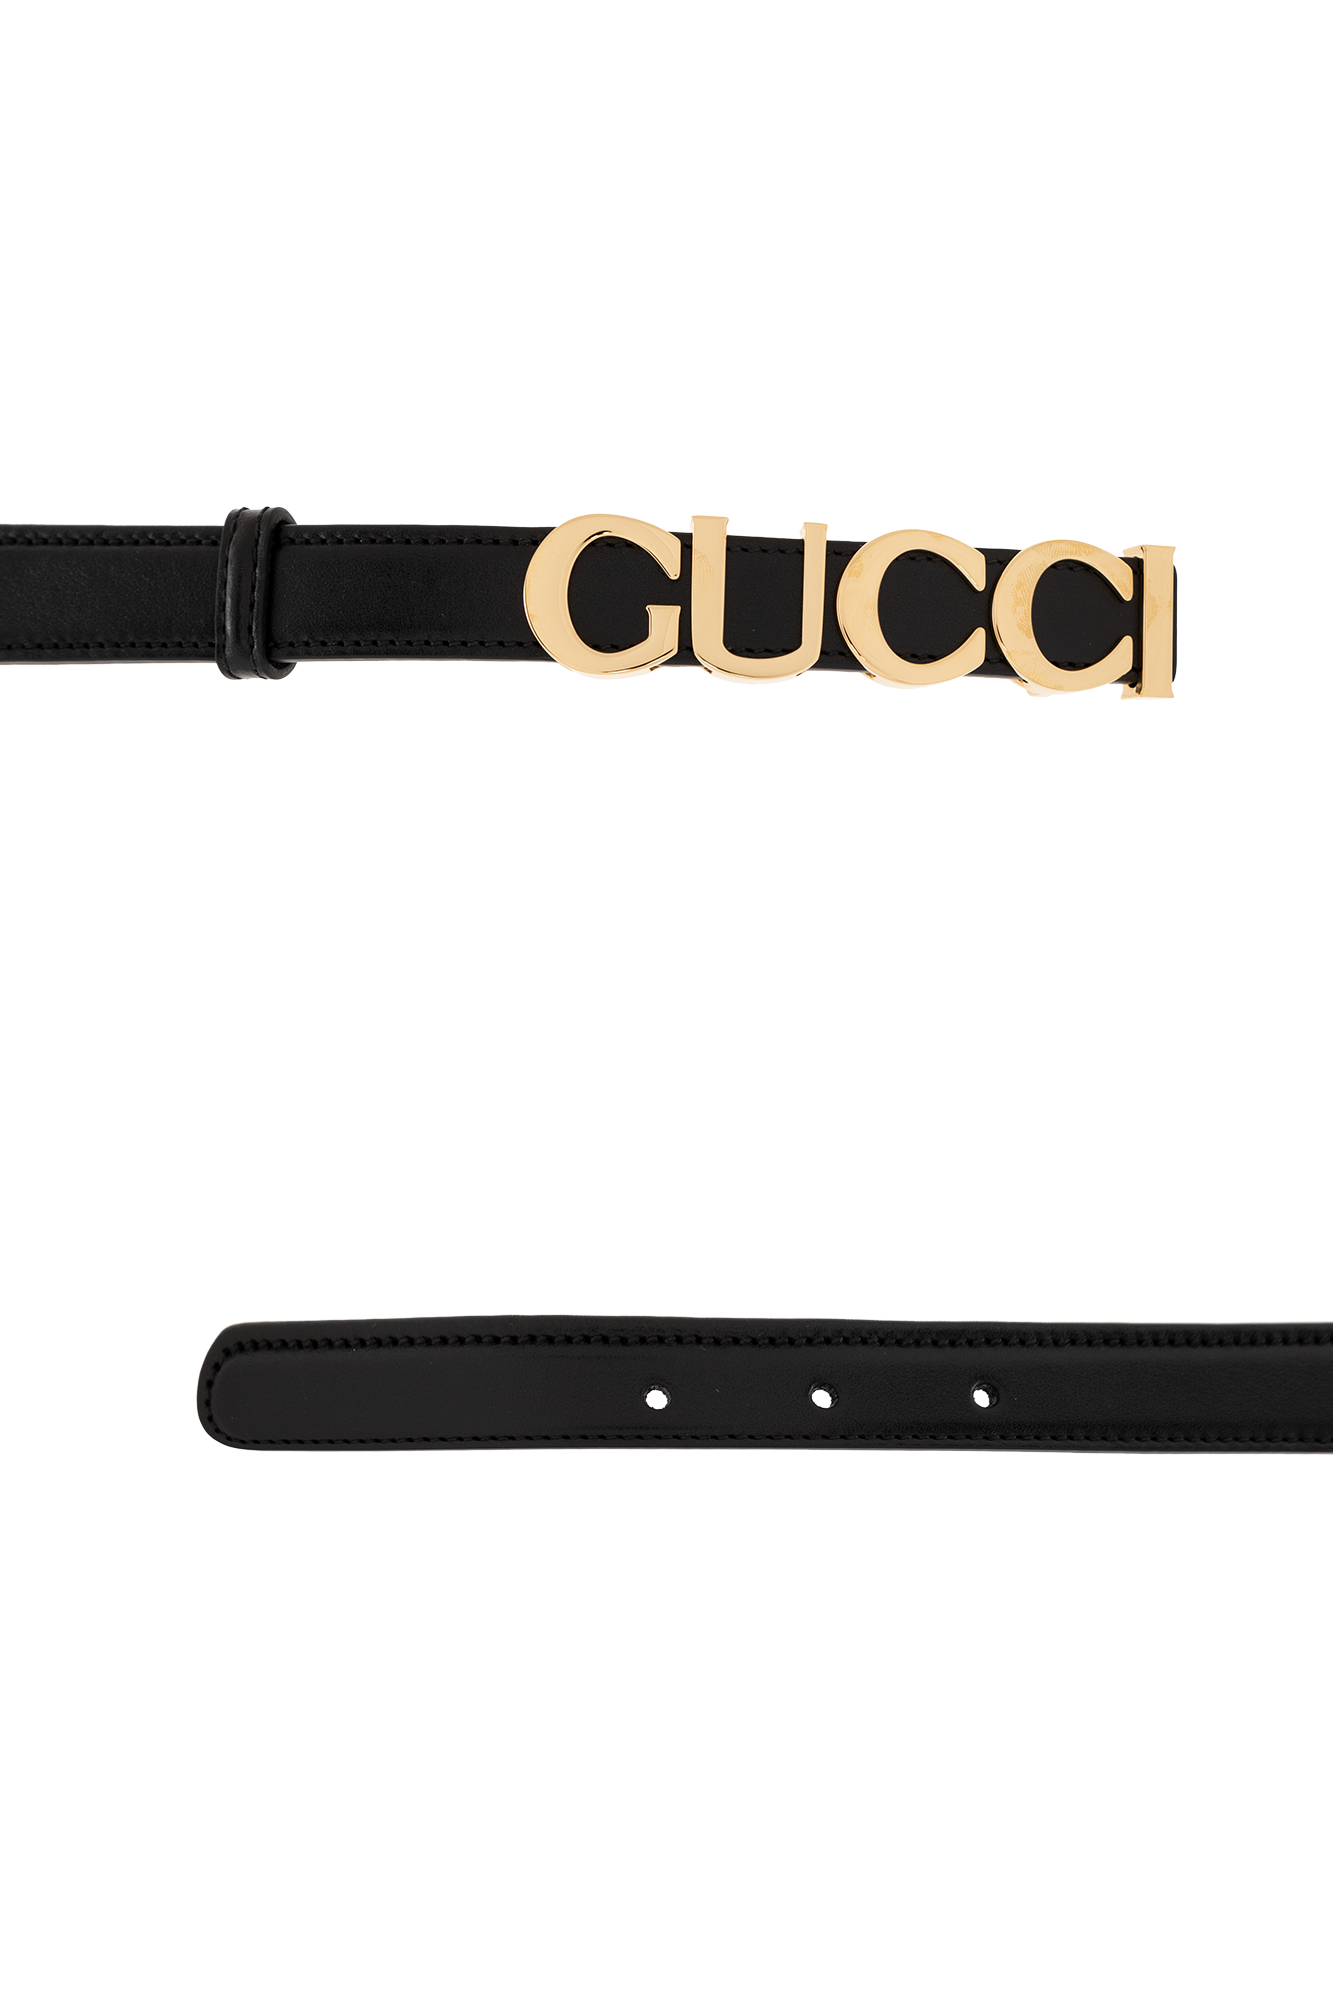 Download Gucci - Louis Vuitton Belt Canada - Full Size PNG Image